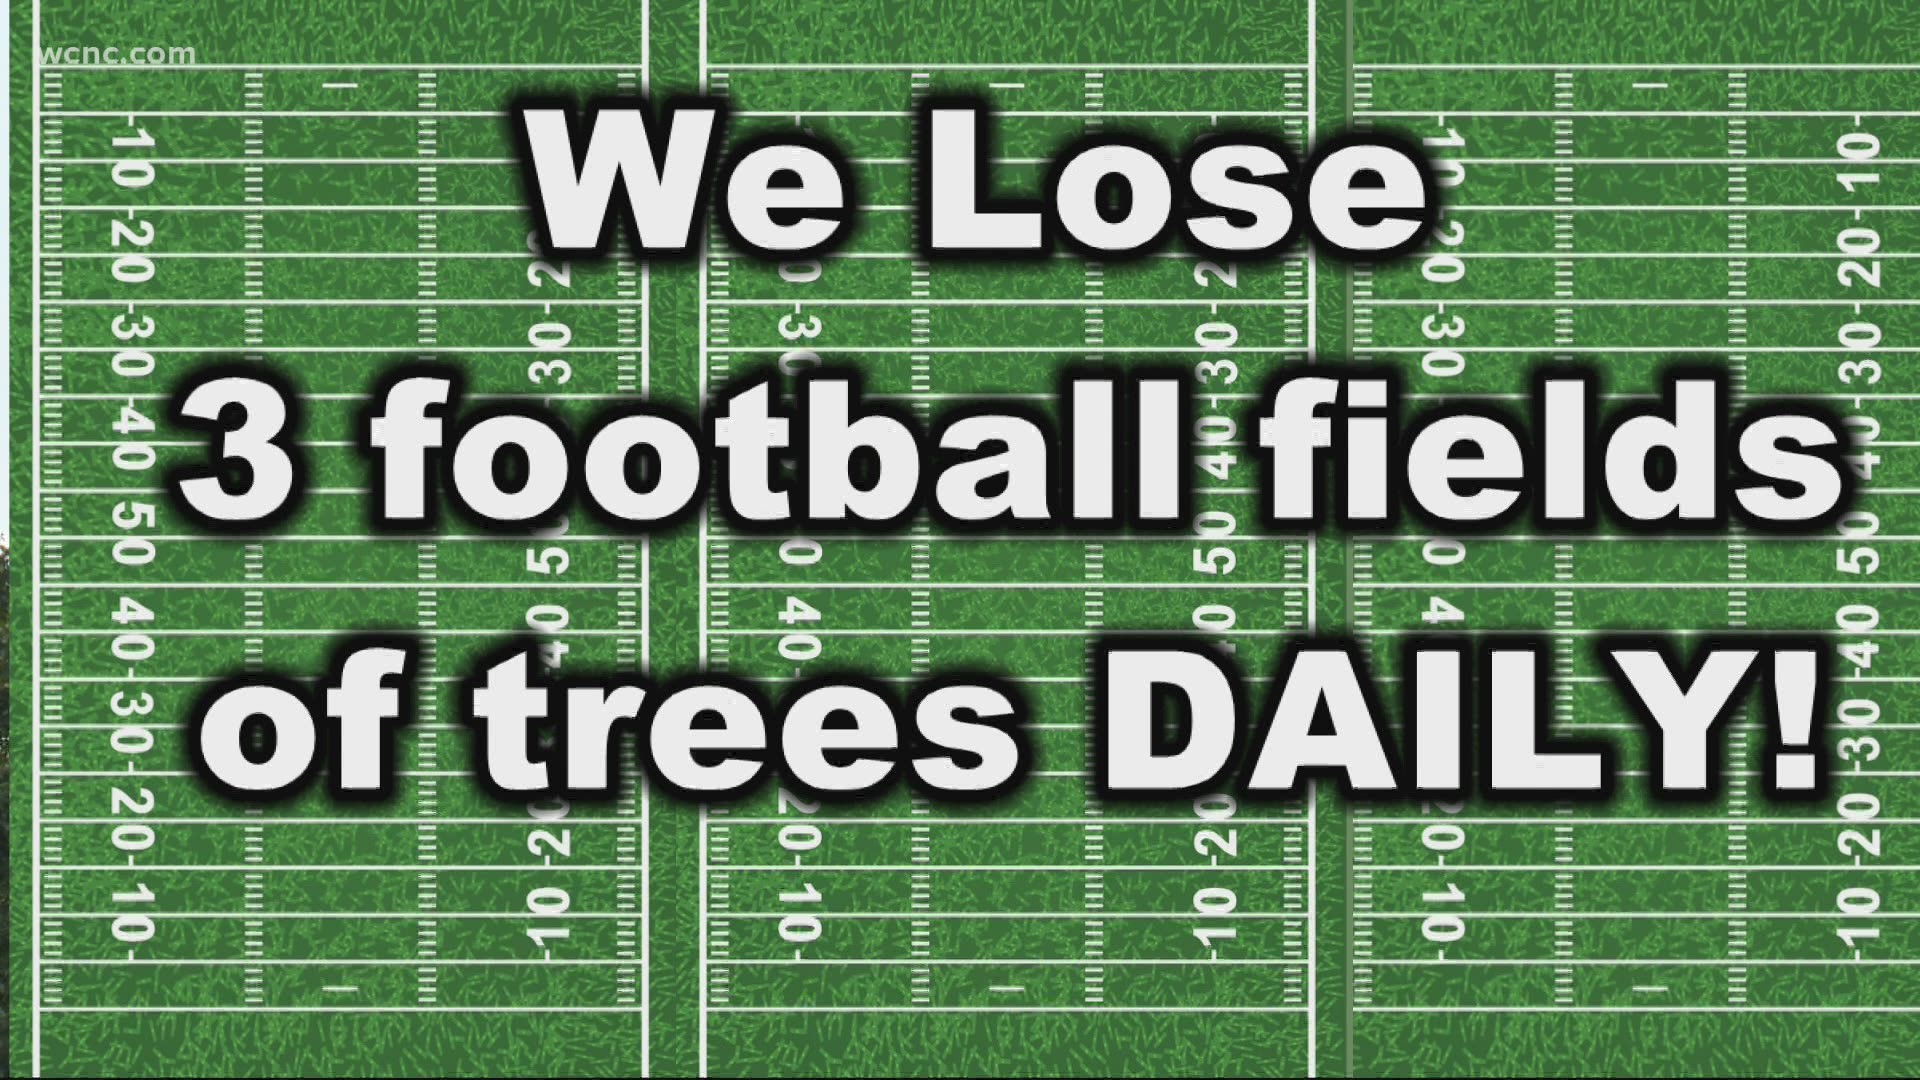 Charlotte is losing the equivalent of 3 football fields of trees a day.